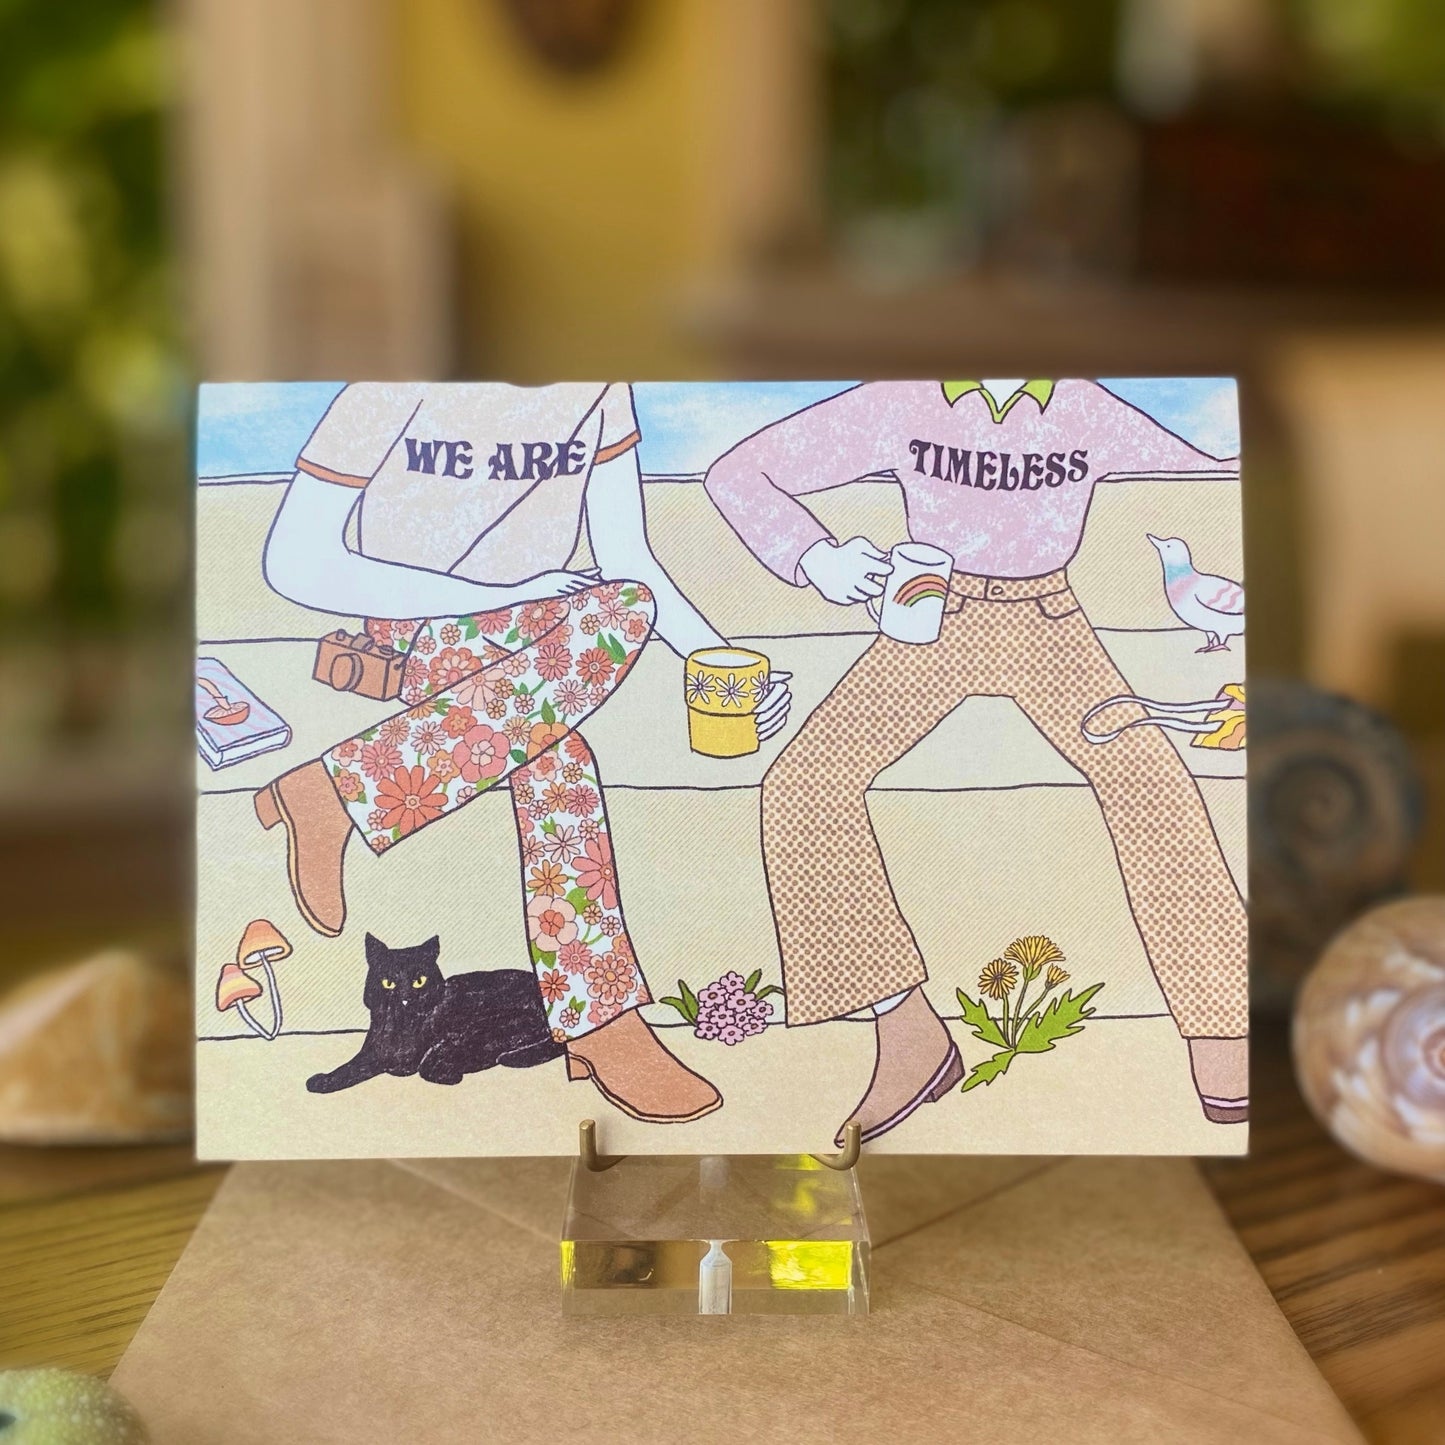 vintage themed just because card that says ”We are Timeless” with the illustration of two people dressed in 70s fashion